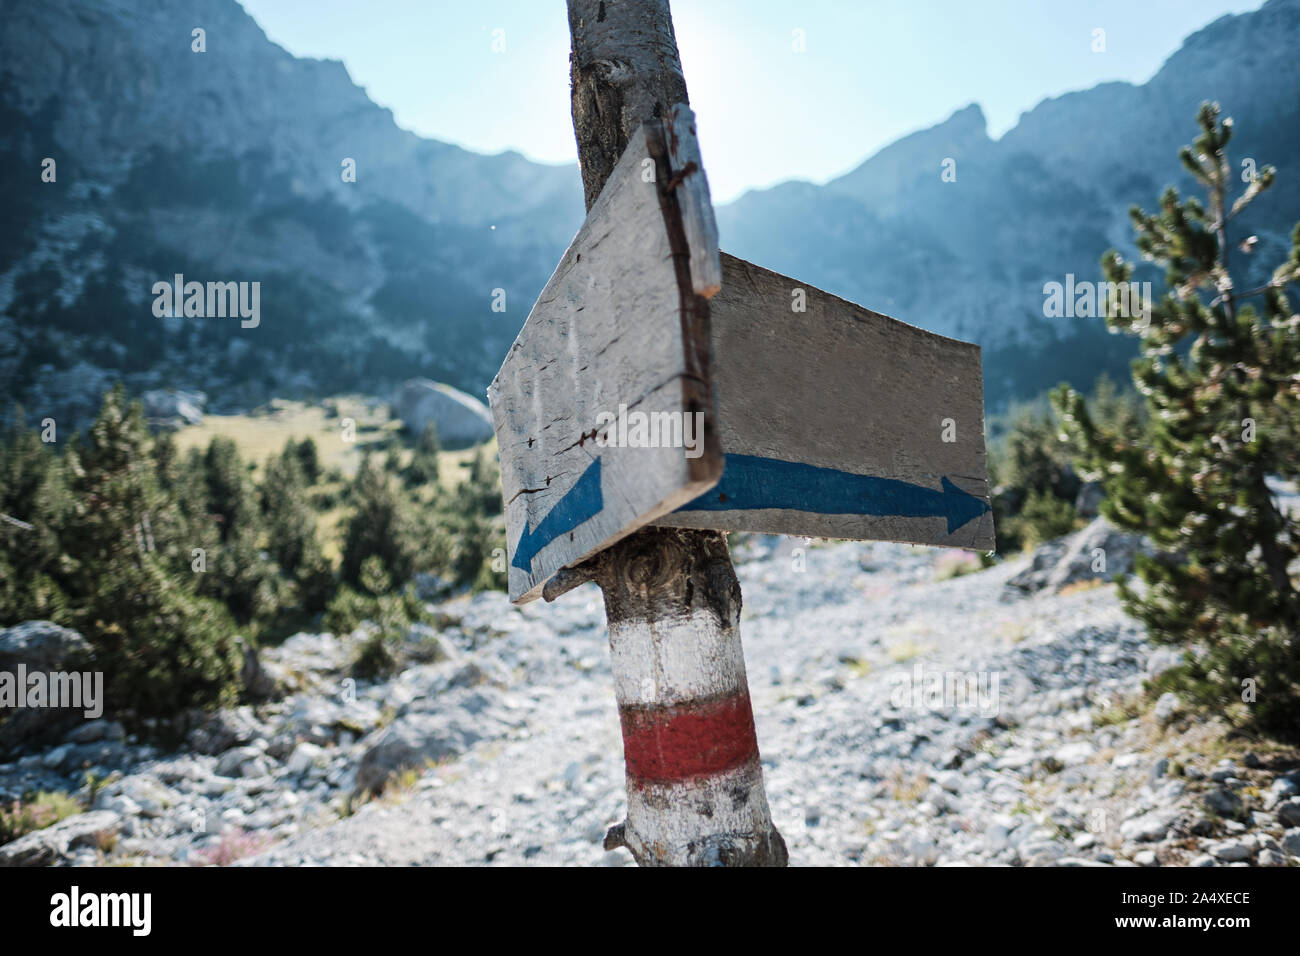 Two signs hanged on a birch tree indicating a crossroads in the mountains with empty space Stock Photo